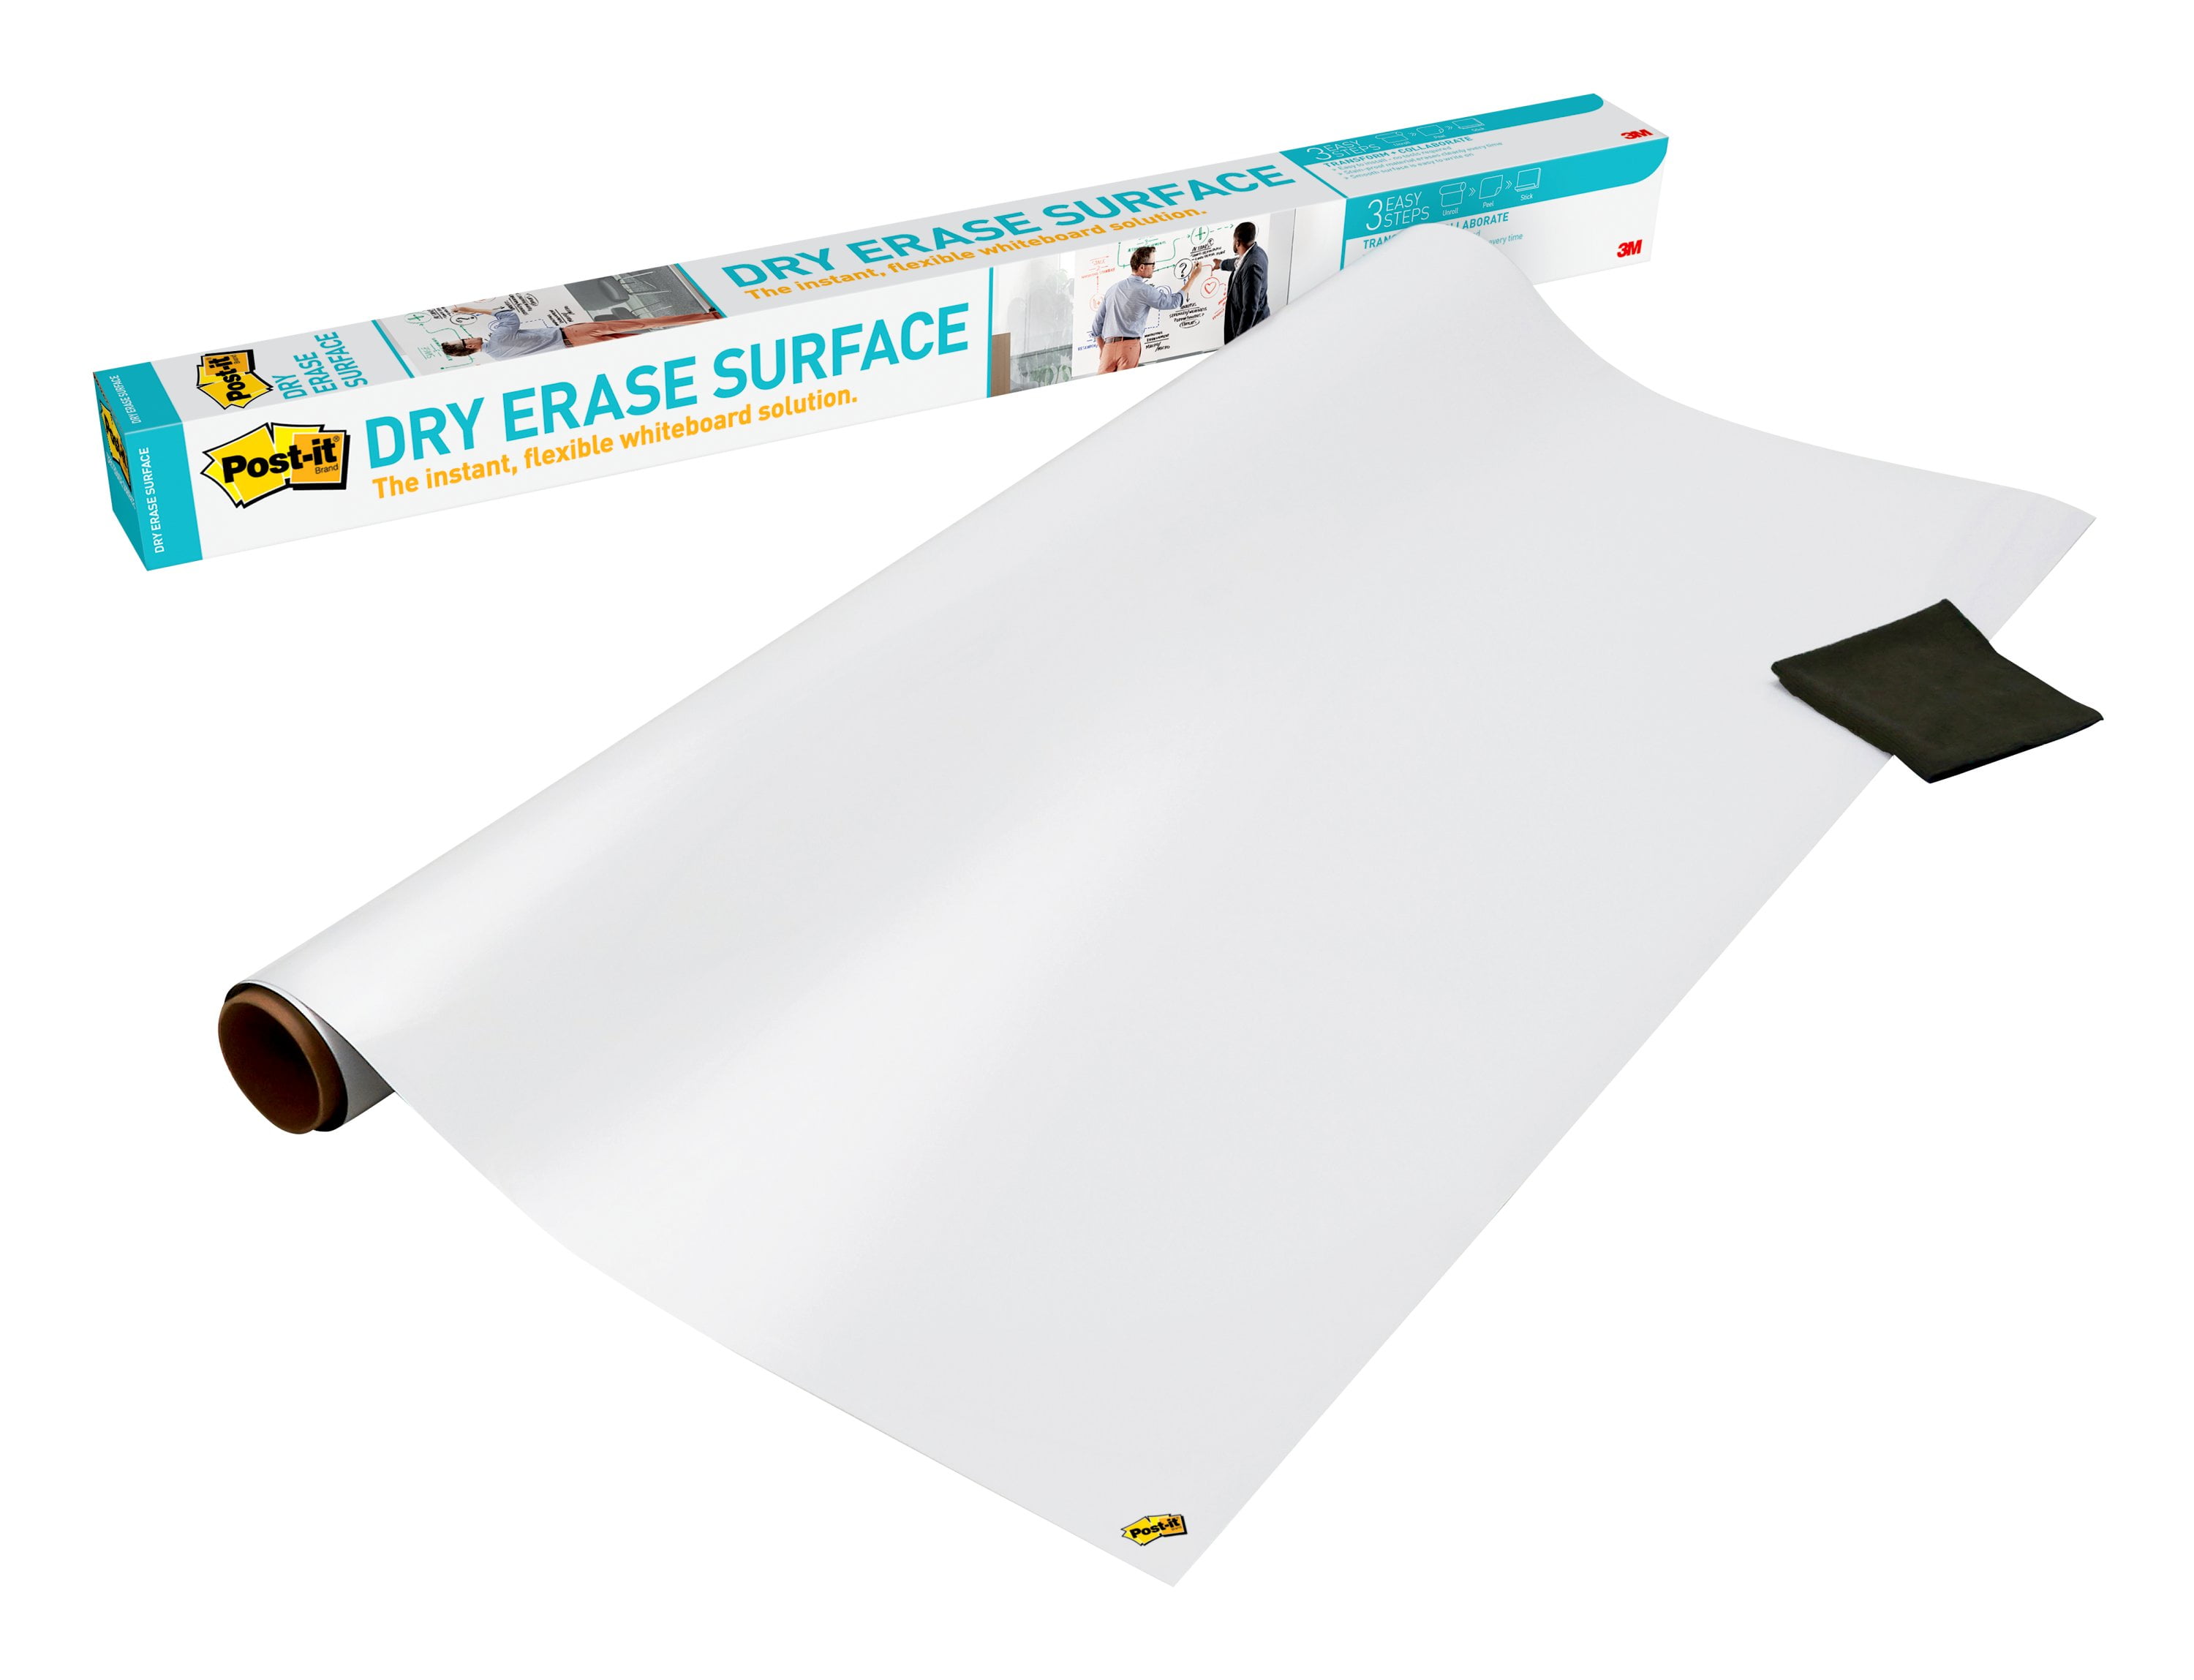 Home School No Ghosting Convert Your Old Damaged Whiteboard into Brand New SUPER LARGE 4 x 8 ft Premium Glossy Whiteboard Wallpaper Film Peel and Stick Dry Erase Sticker Board on Wall Office Decals